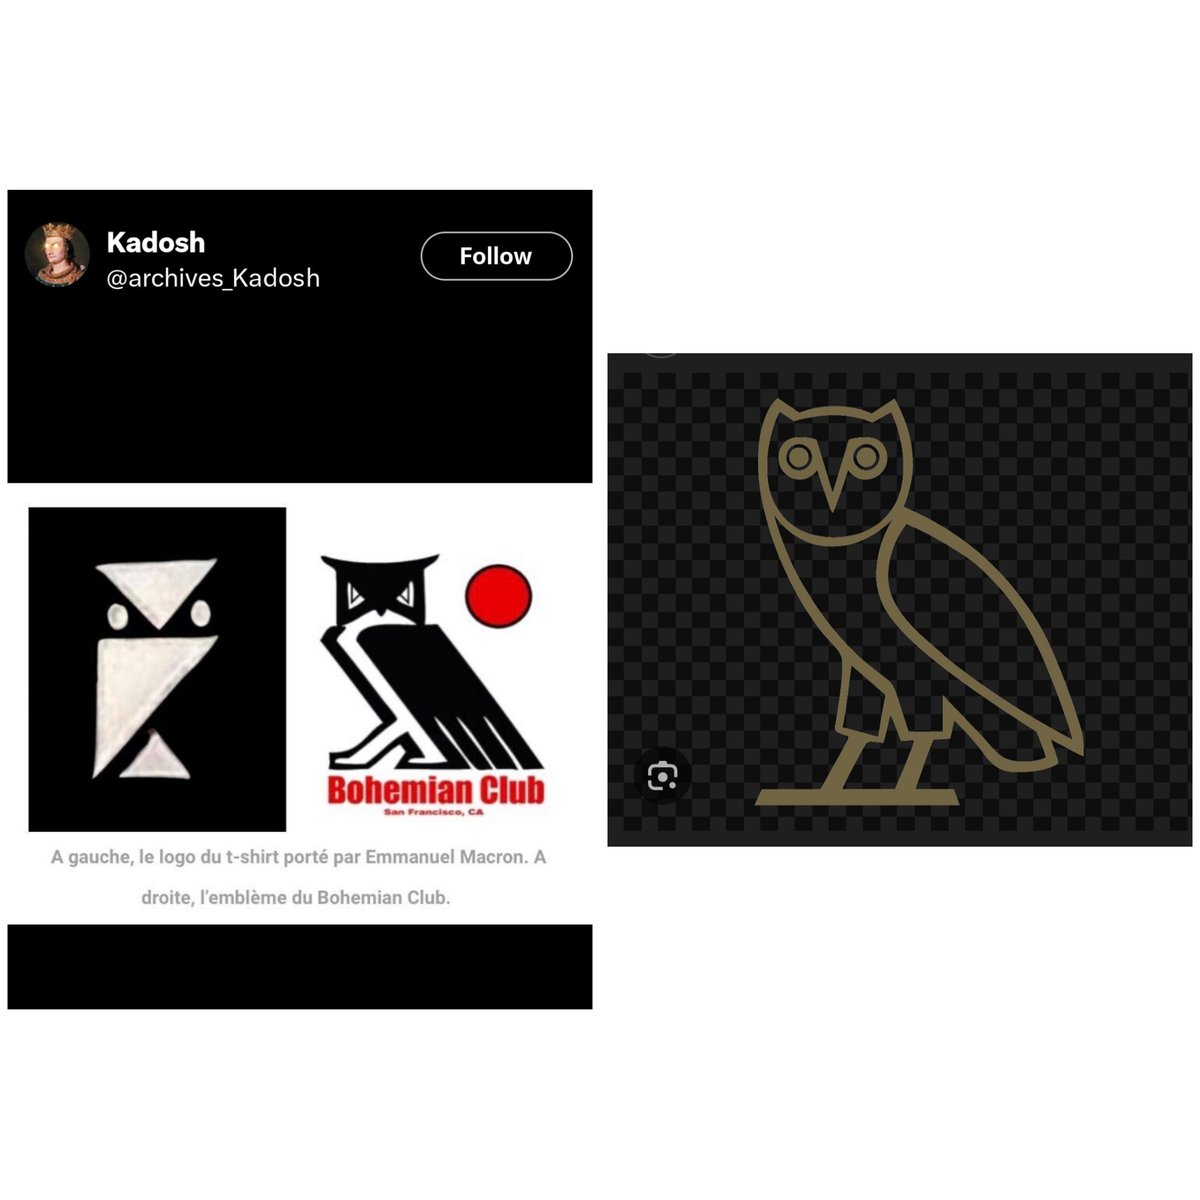 @StateDispatch The famous Owl within the elites club  🤔🤔👀👀
Bohemian club Owl & Drake ovo Owl ..... inspired much 👀...
Bohemian Grove club ...
40ft Owl stone owl in redwood forest 
A club for the wealthy 
A club for human sacrifice 
A yearly event 
A retristricted area 
#ElitesOwl